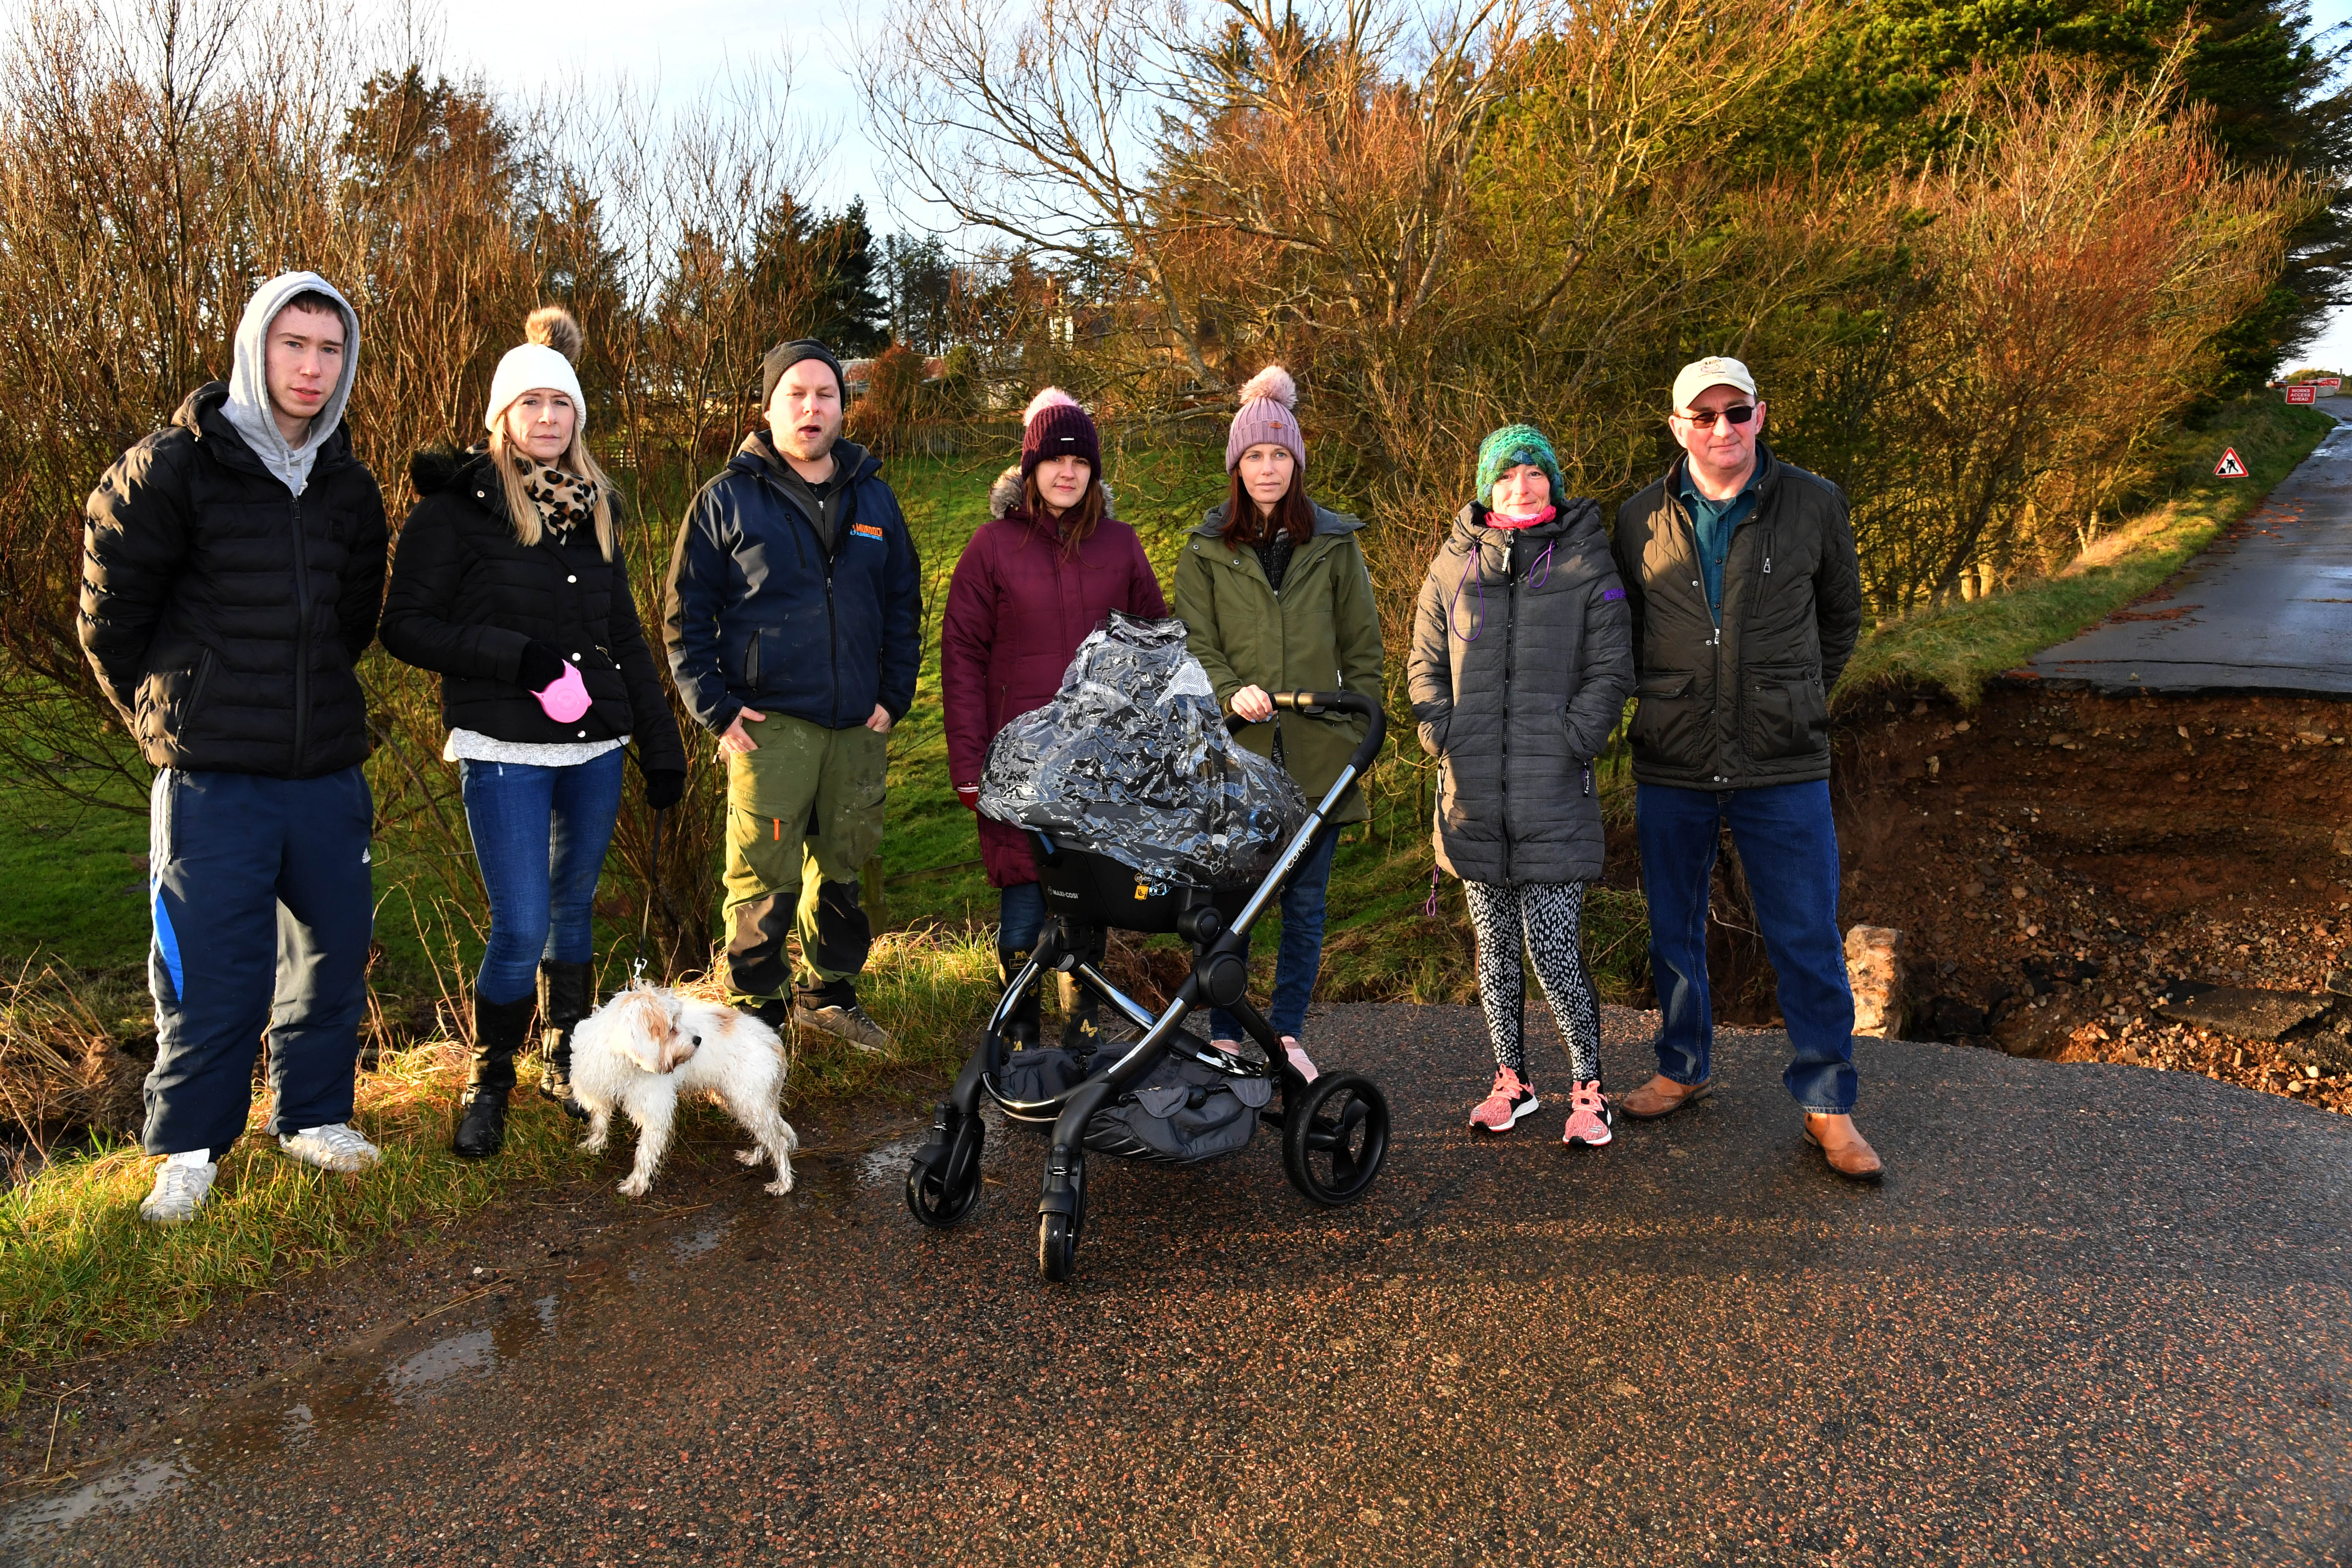 L-R: Andrew Farquhar, Nicola Farquhar, Euan Murdoch, Lynne Duncan, Helen Wilson, Sam Philip And Cliff Pirie at one of the four bridges at King Edward which was swept away in September and nothing has been done about it.